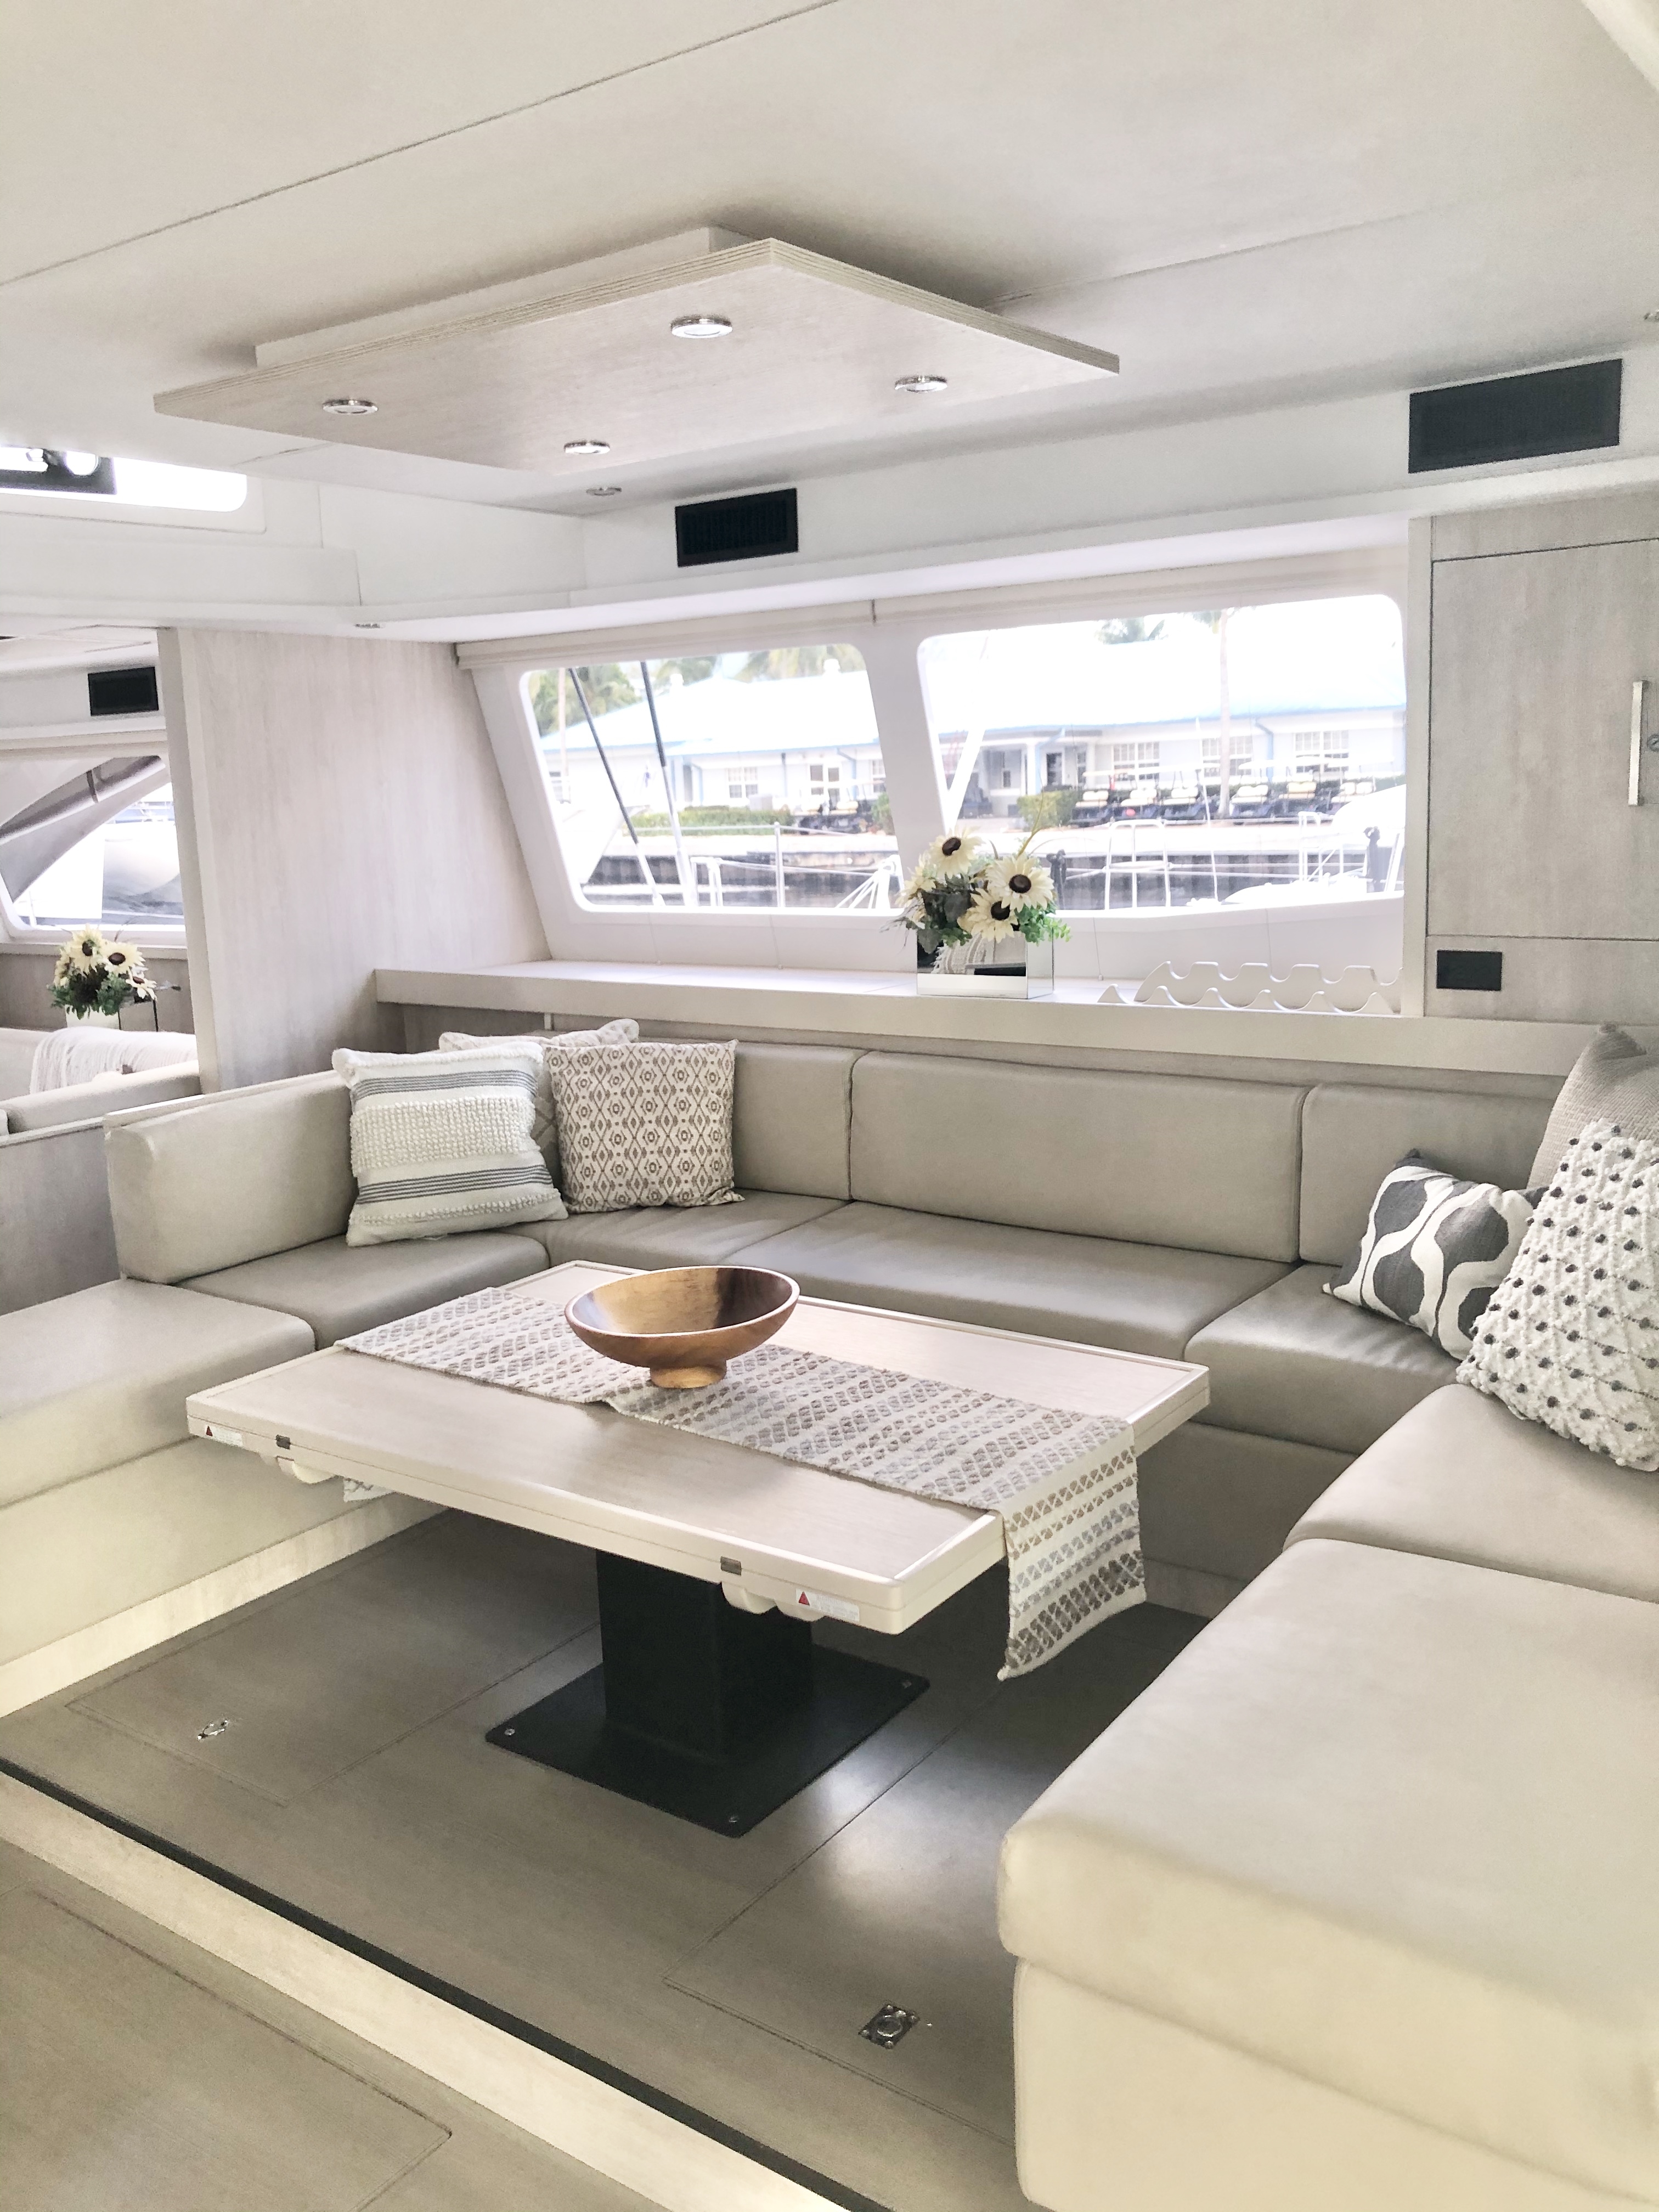 Used Sail Catamaran for Sale 2018 Leopard 58 Layout & Accommodations